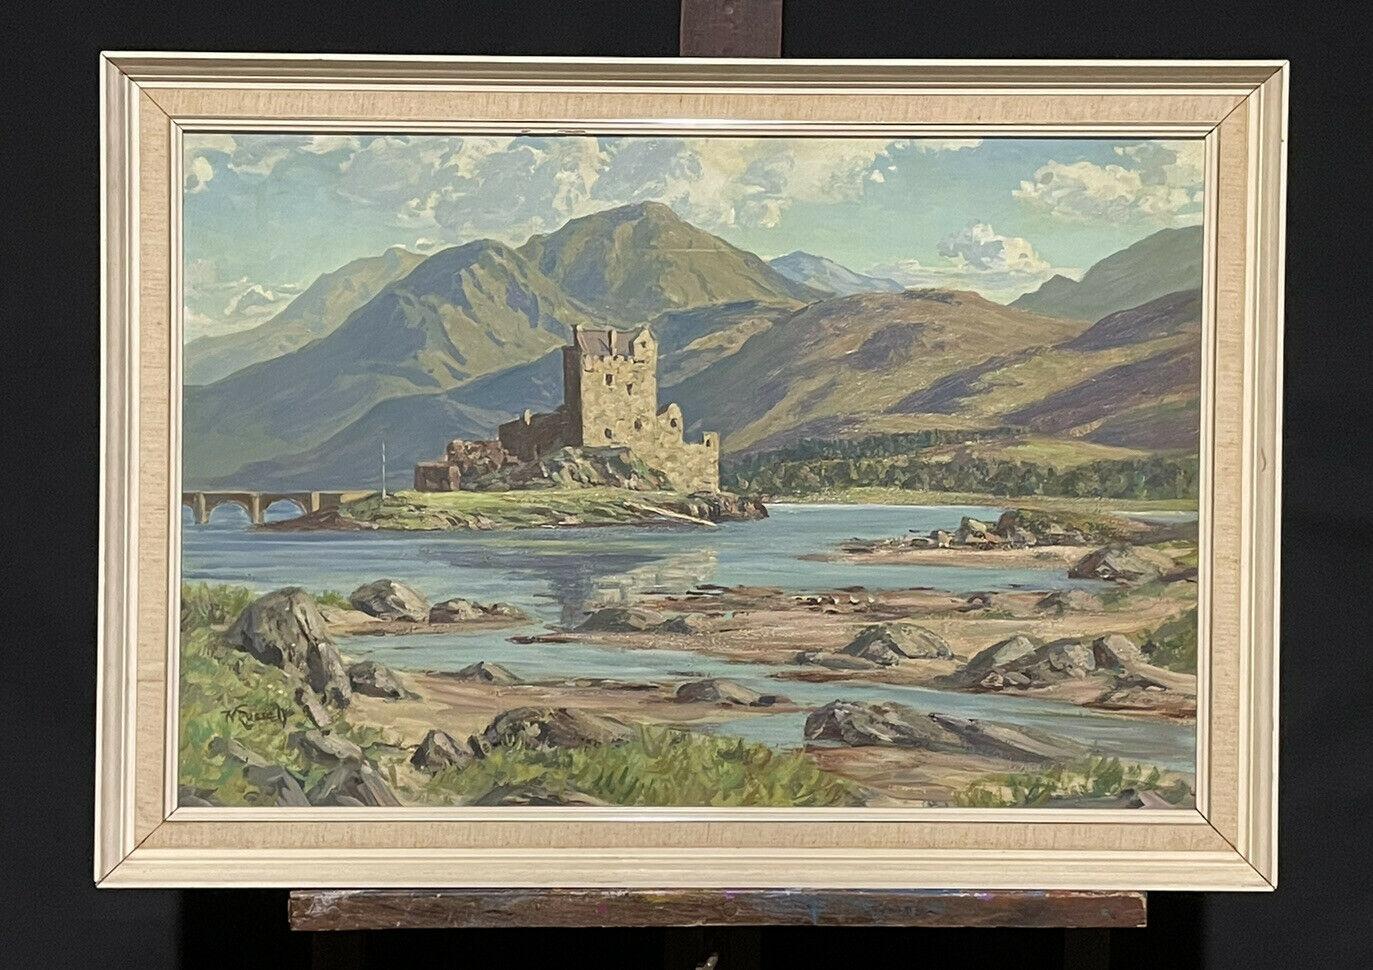 EILEAN DONAN CASTLE SCOTLAND - MID 20TH CENTURY BRITISH SIGNED OIL PAINTING  - Painting by William Russell